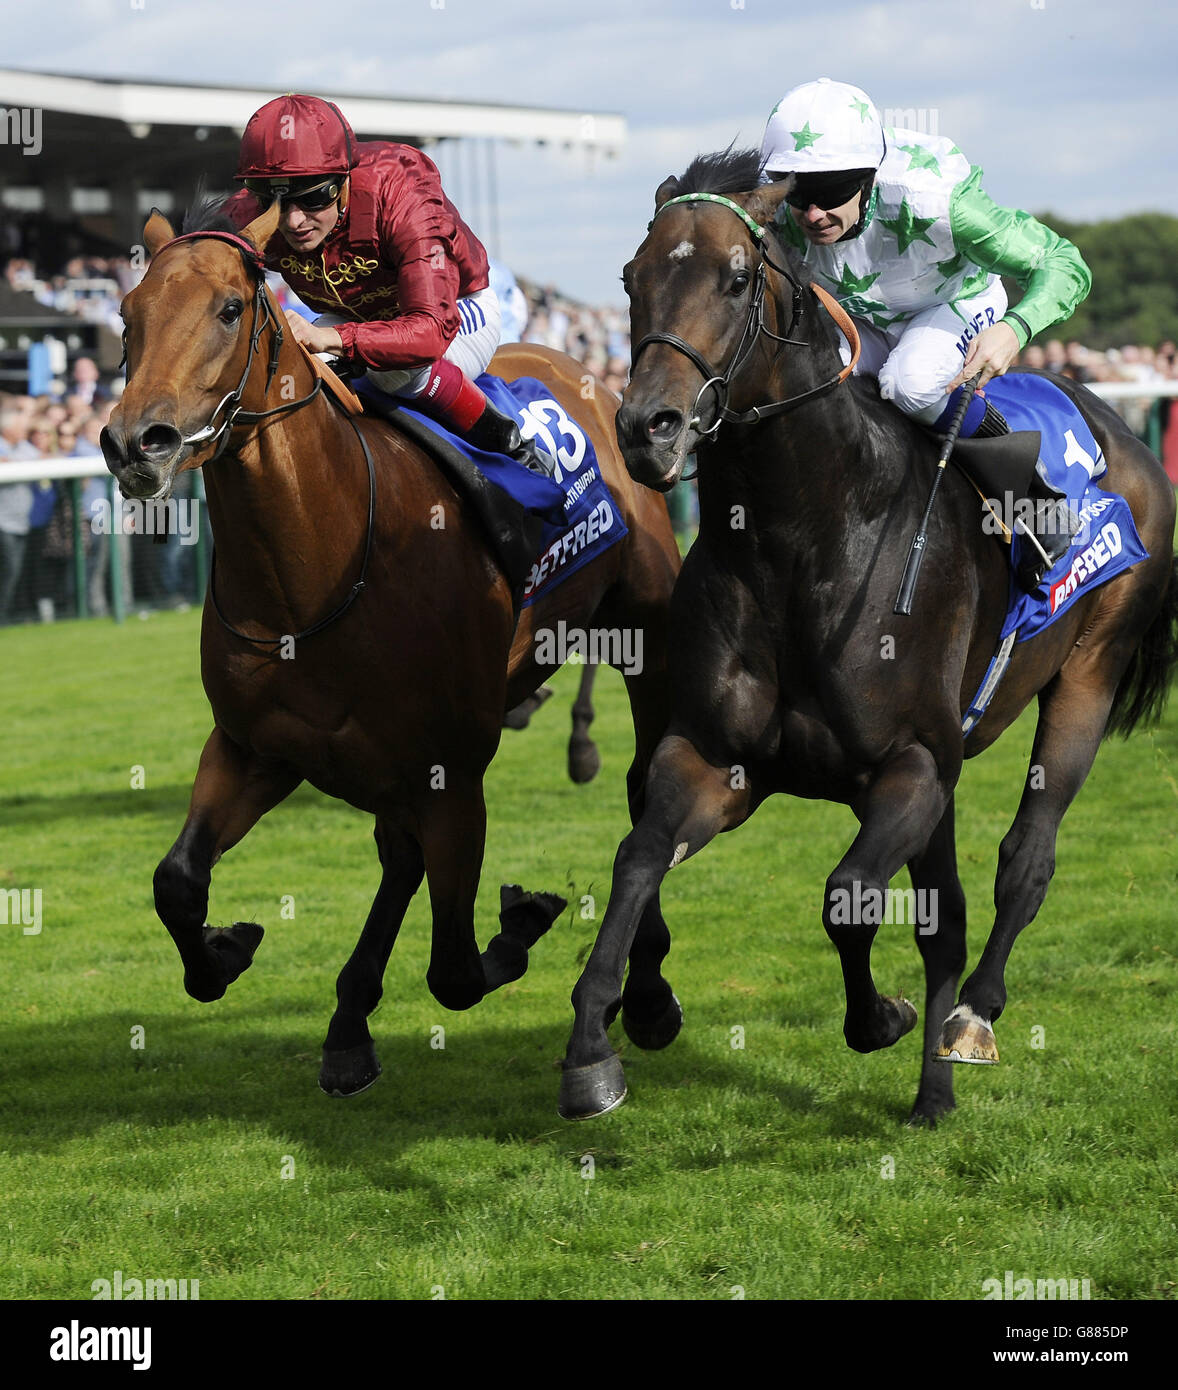 Twilight Son ridden by Fergus Sweeney (right) gets up to beat Strath Burn ridden by Andrea Atzeni to win the Betfred Sprint Cup during the Betfred Sprint Cup Day at Haydock Racecourse, Haydock. PRESS ASSOCIATION Photo. Picture date: Saturday September 5, 2015. See PA story RACING Haydock. Photo credit should read: John Giles/PA Wire Stock Photo